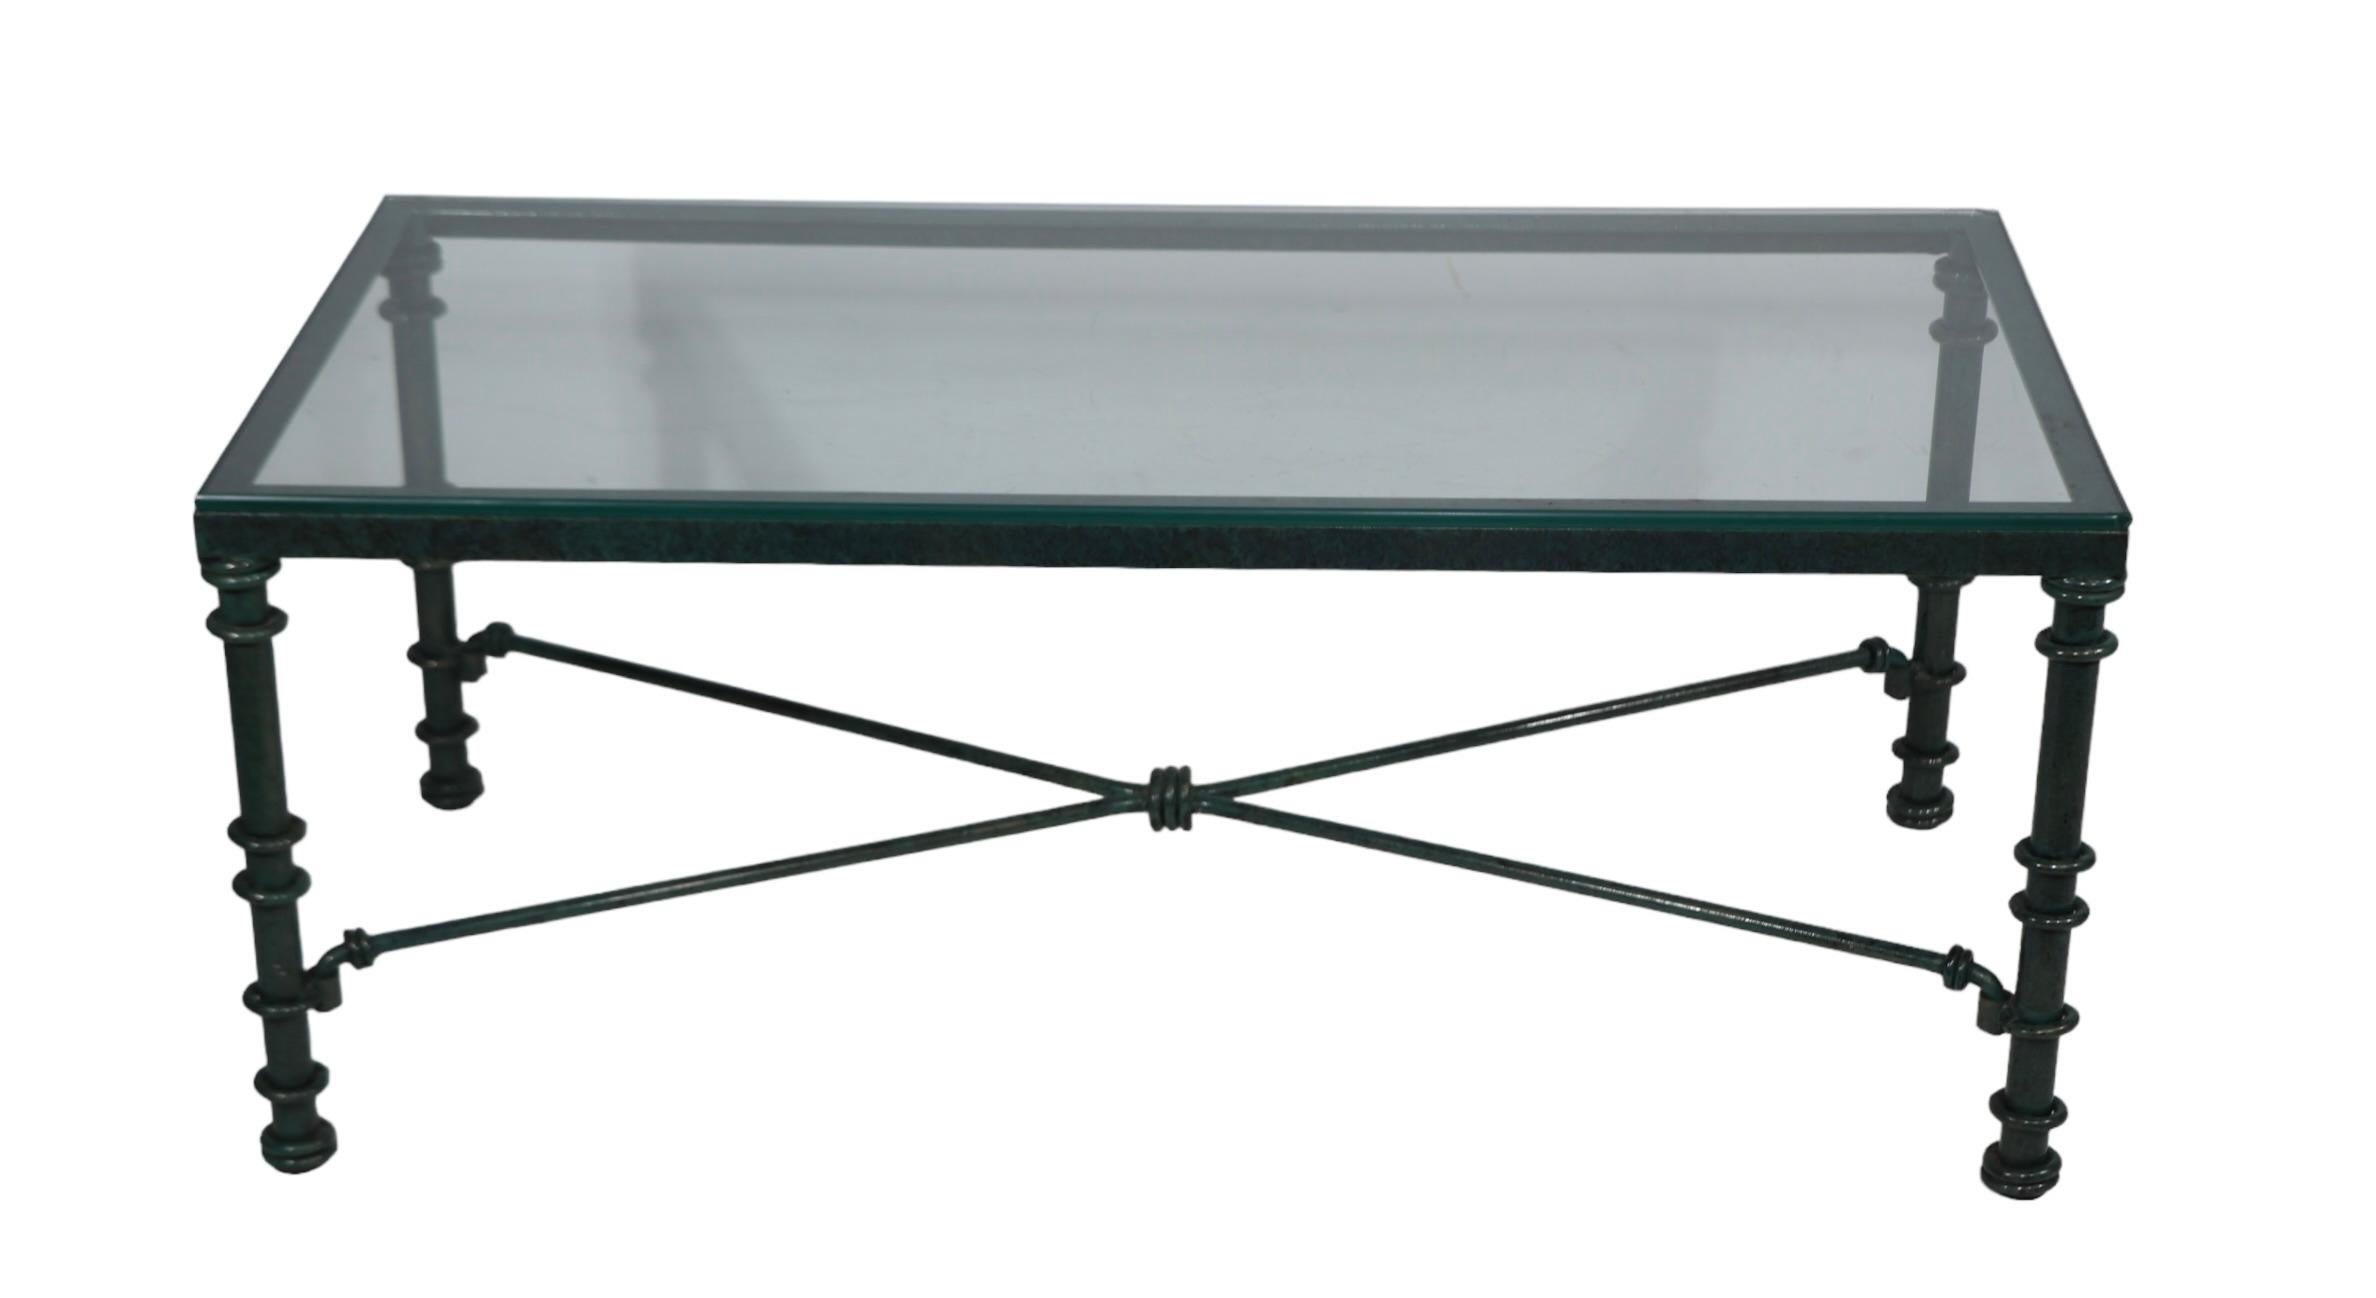 Brutalist Faux Verdigris Finish Glass Top Coffee Table c. 1970/1980's In Good Condition For Sale In New York, NY